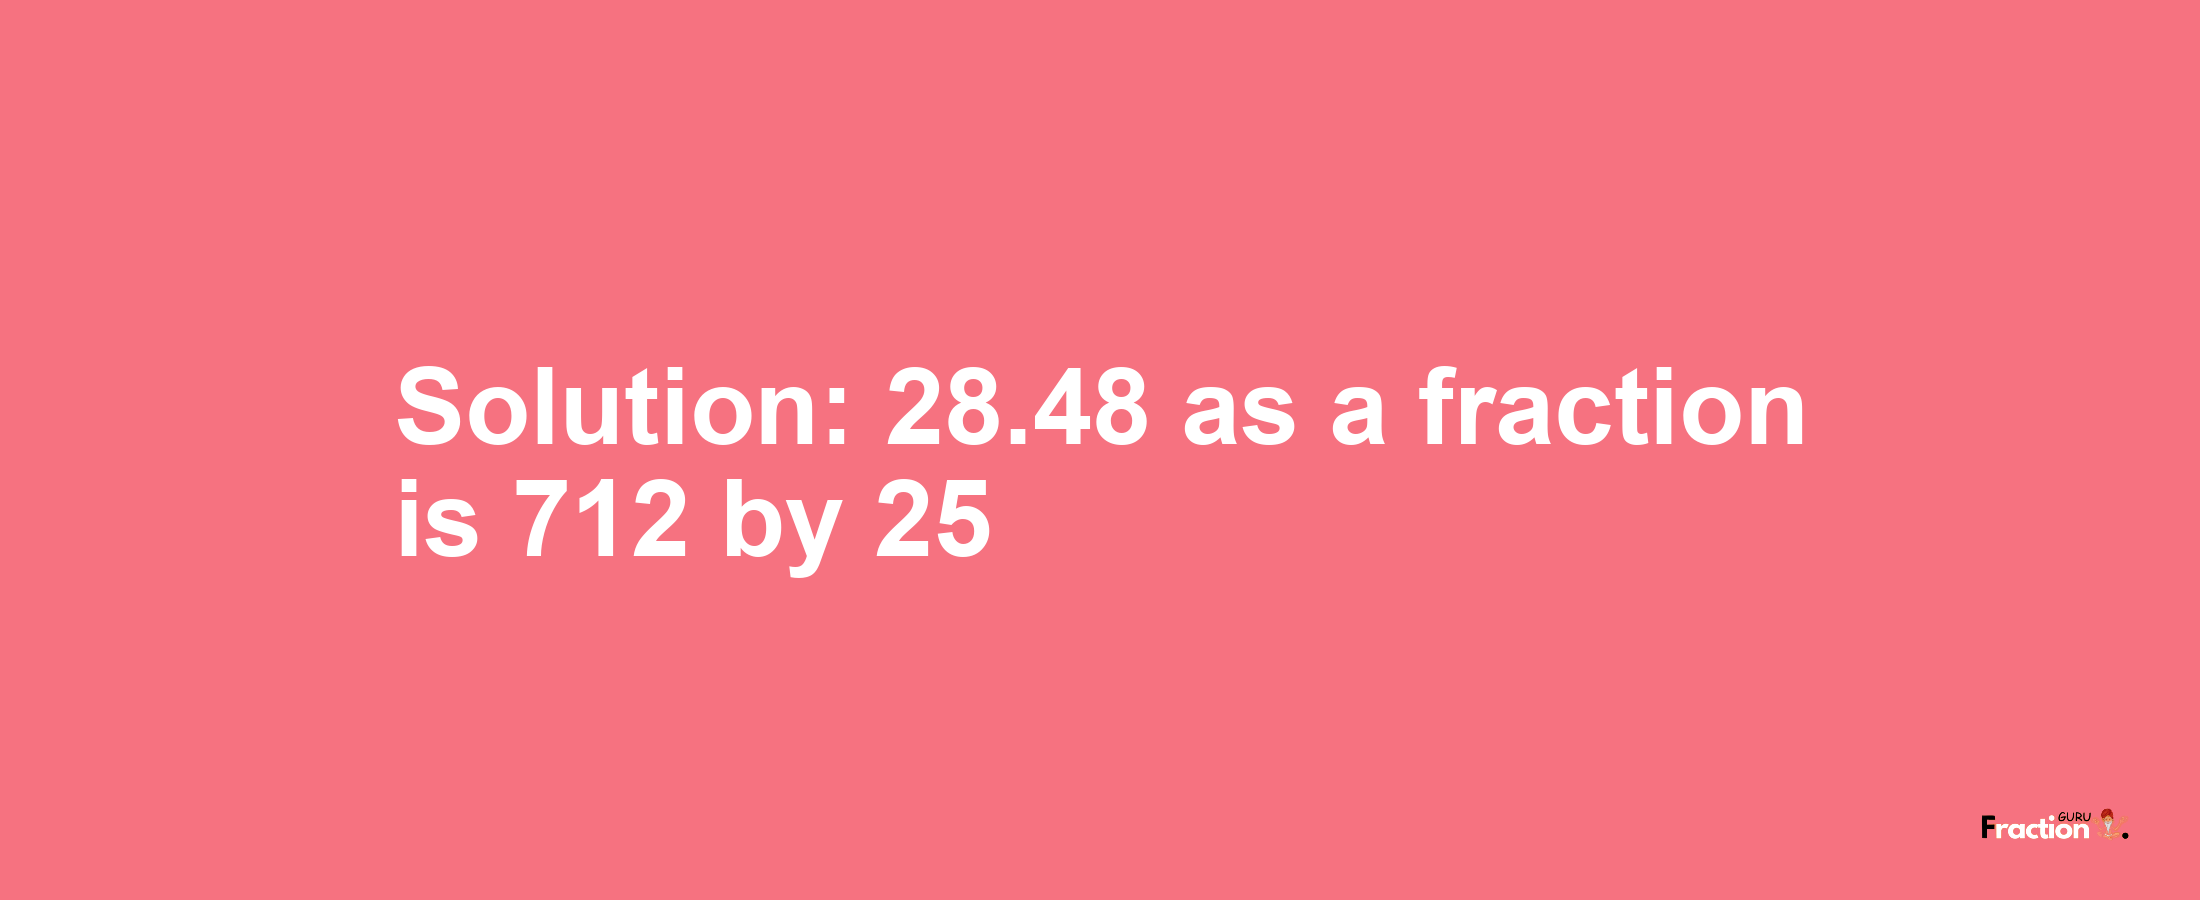 Solution:28.48 as a fraction is 712/25